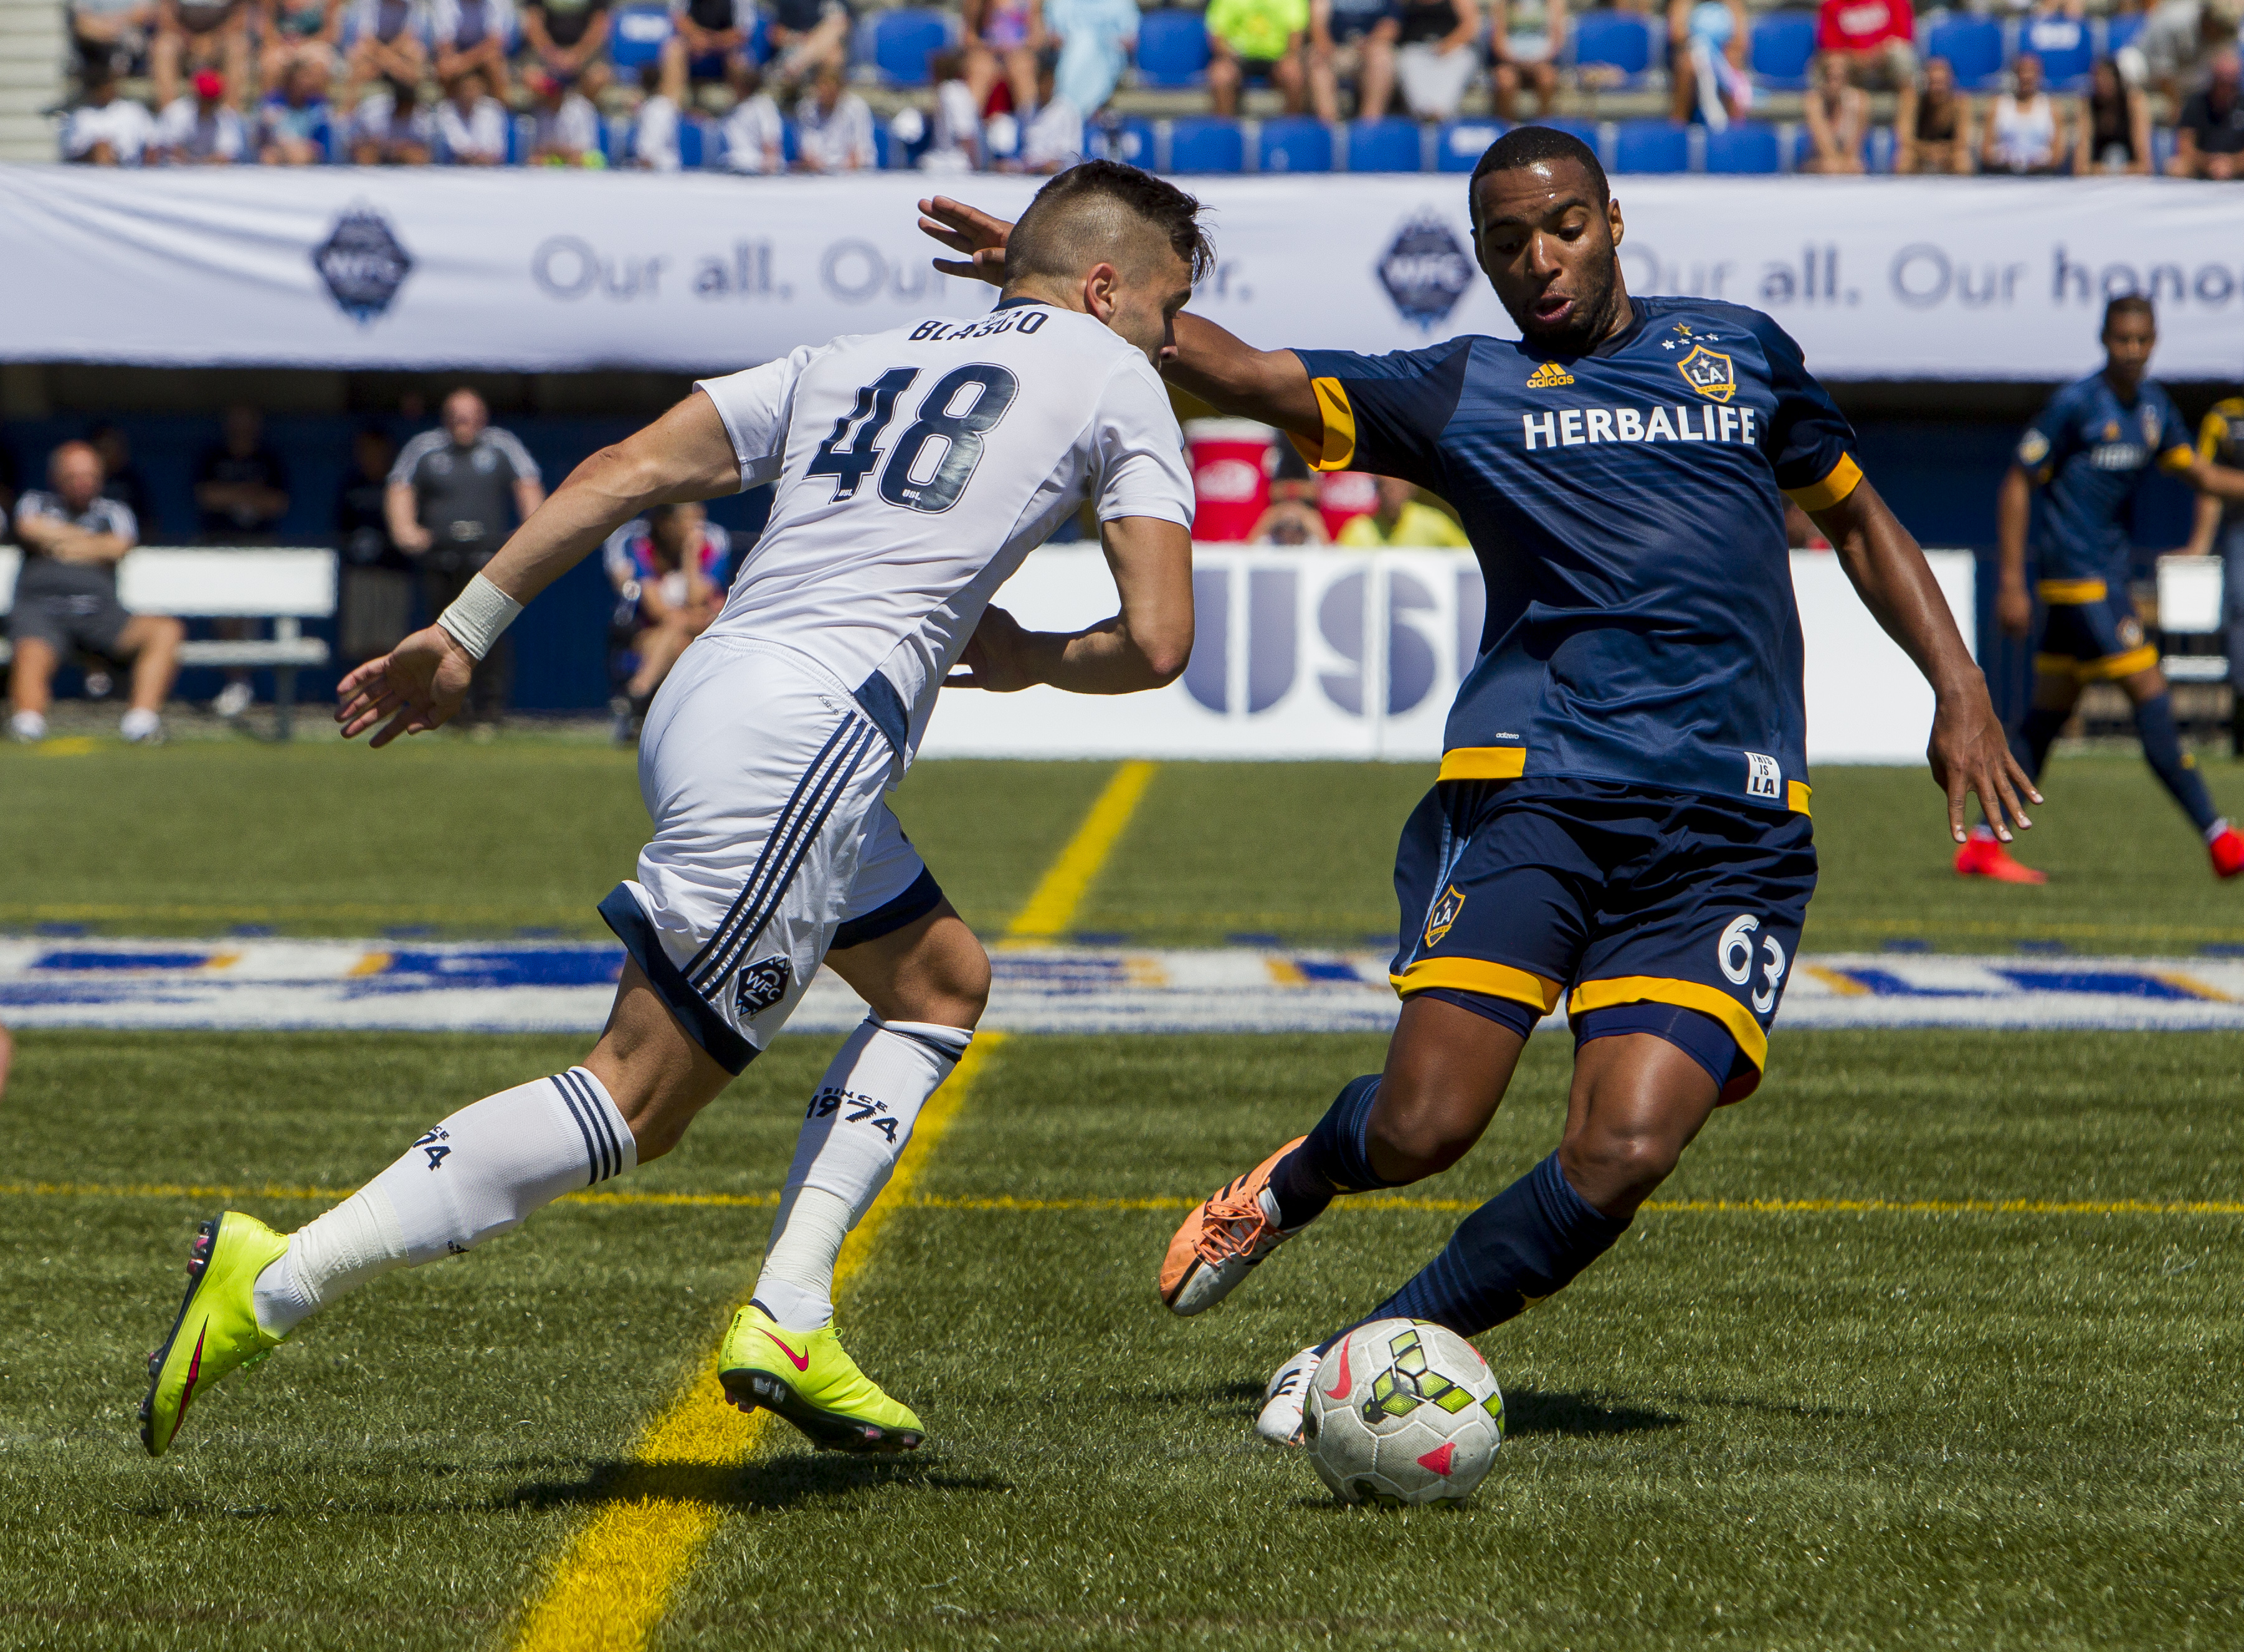 Victor Blasco (L) and Andre Auras battle for the ball during a match between WFC2 and LA Galaxy 2. LA won the match 2-0.